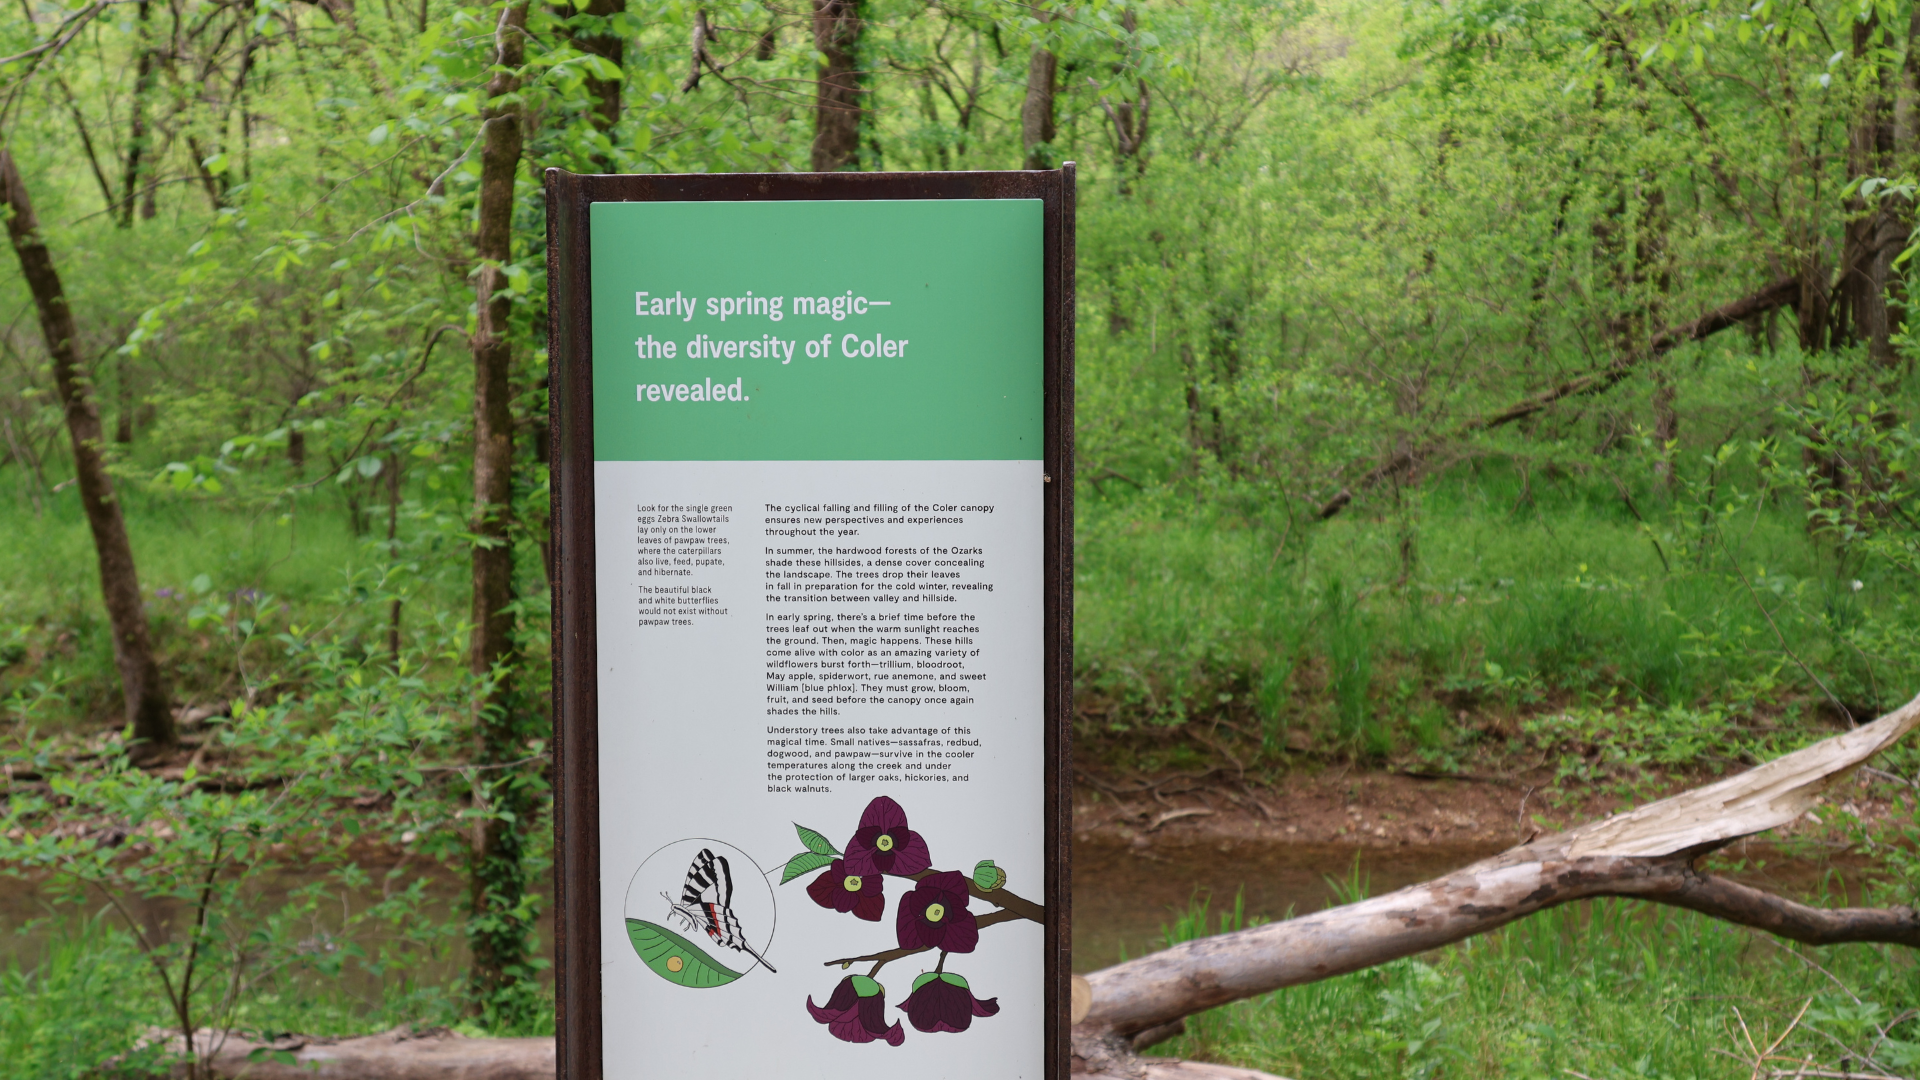 Photo of a metal interpretive sign at Coler stating: "Early Spring Magic: The Diversity of Coler Revealed". Sign is located just off the greenway in front of the creek at Coler